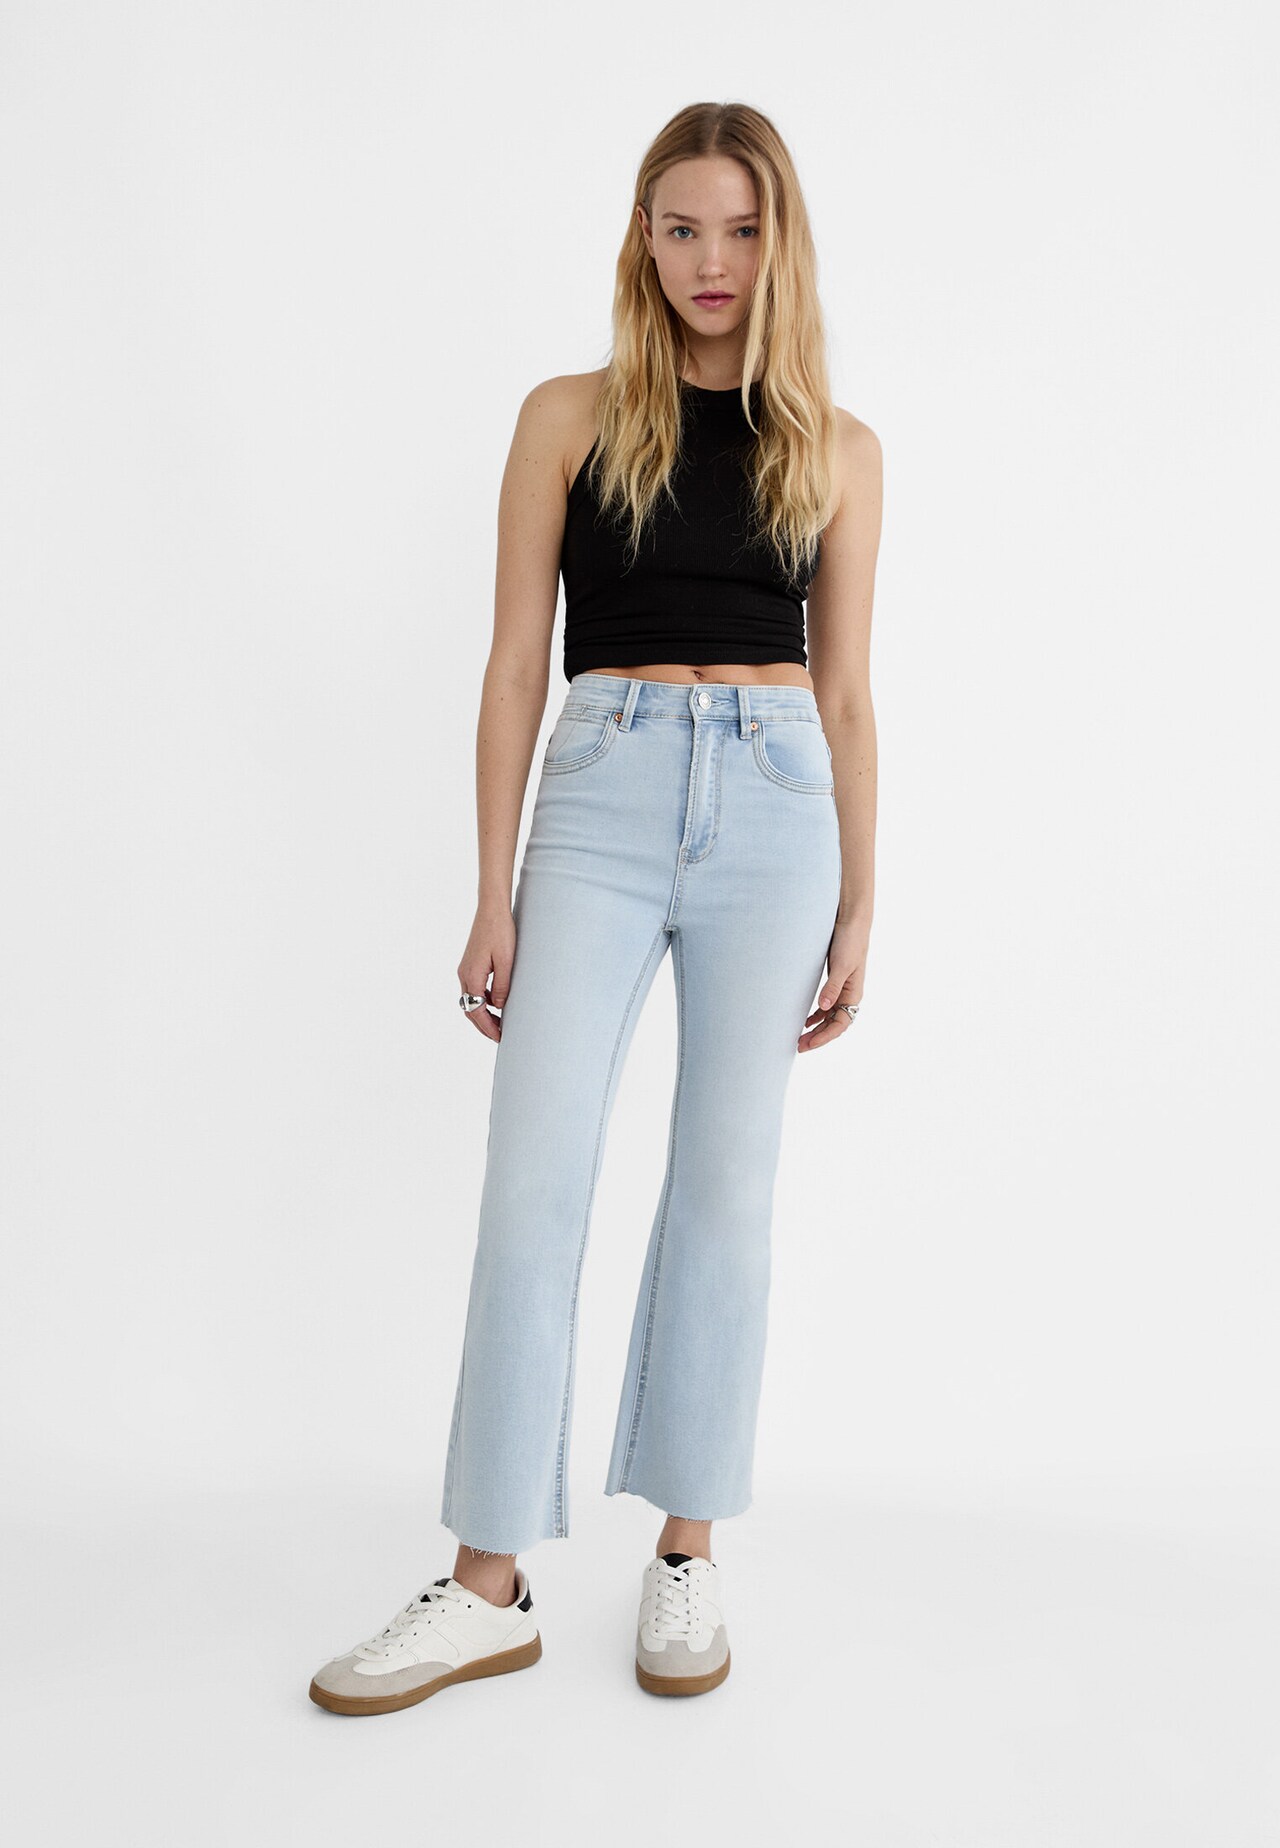 D78 cropped flared jeans - Women's fashion